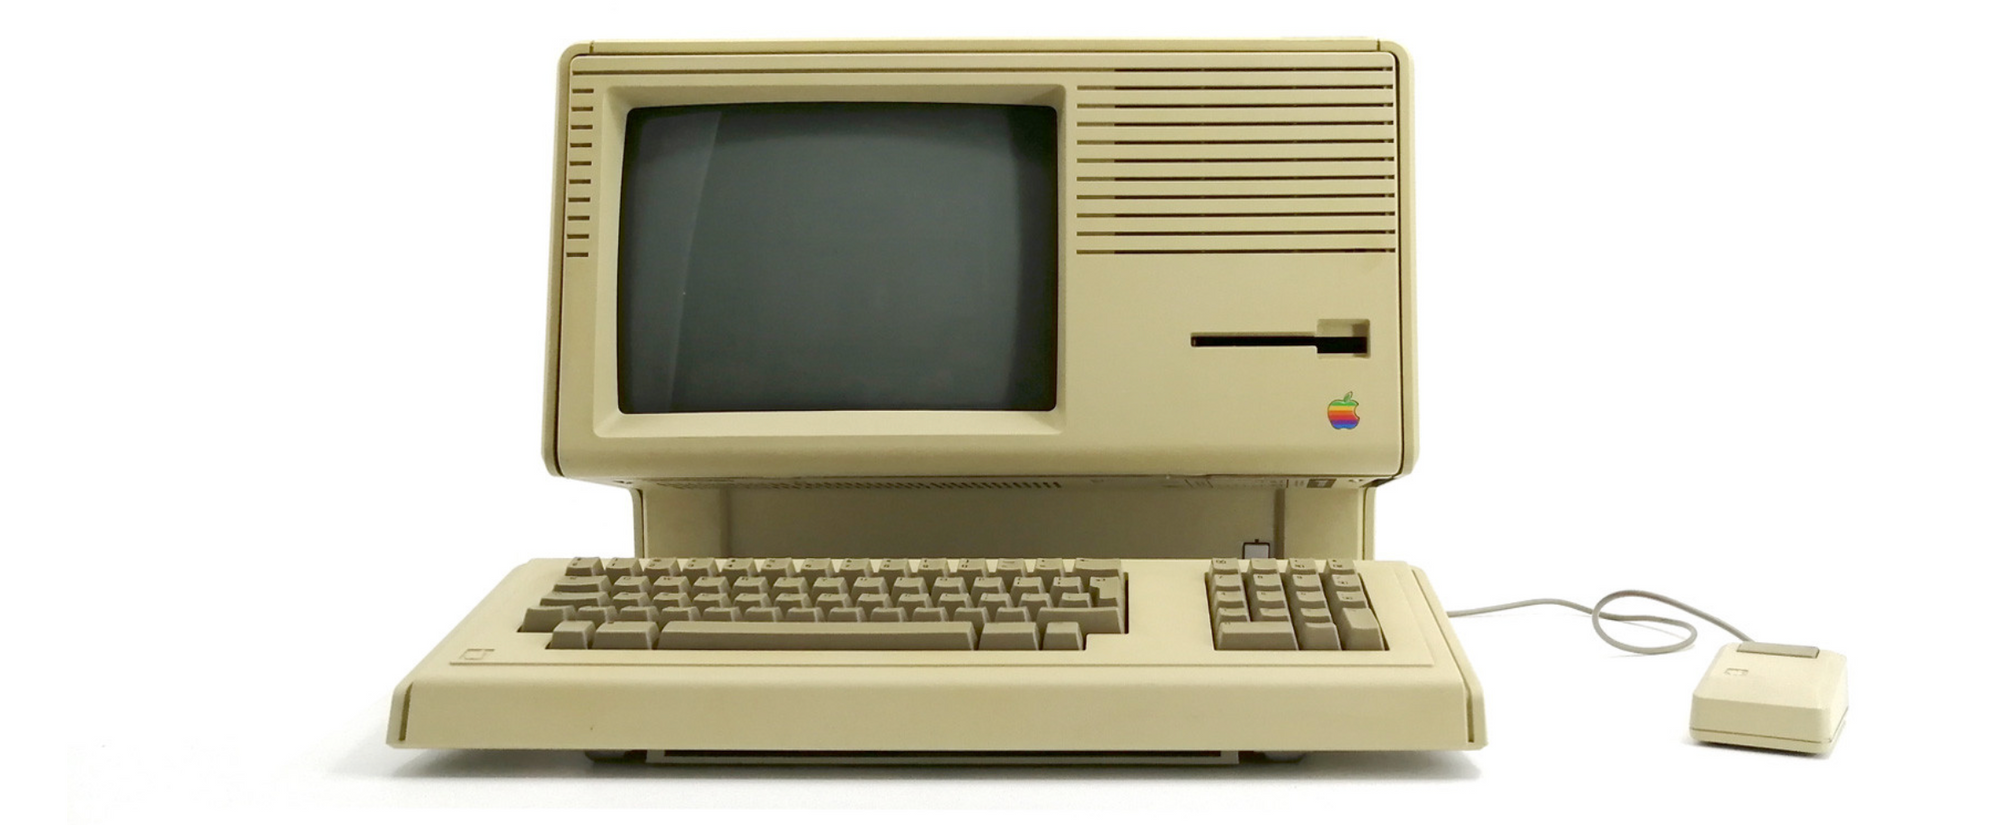 🍎 The Lisa is 40 years old, and we still misread it as a failure